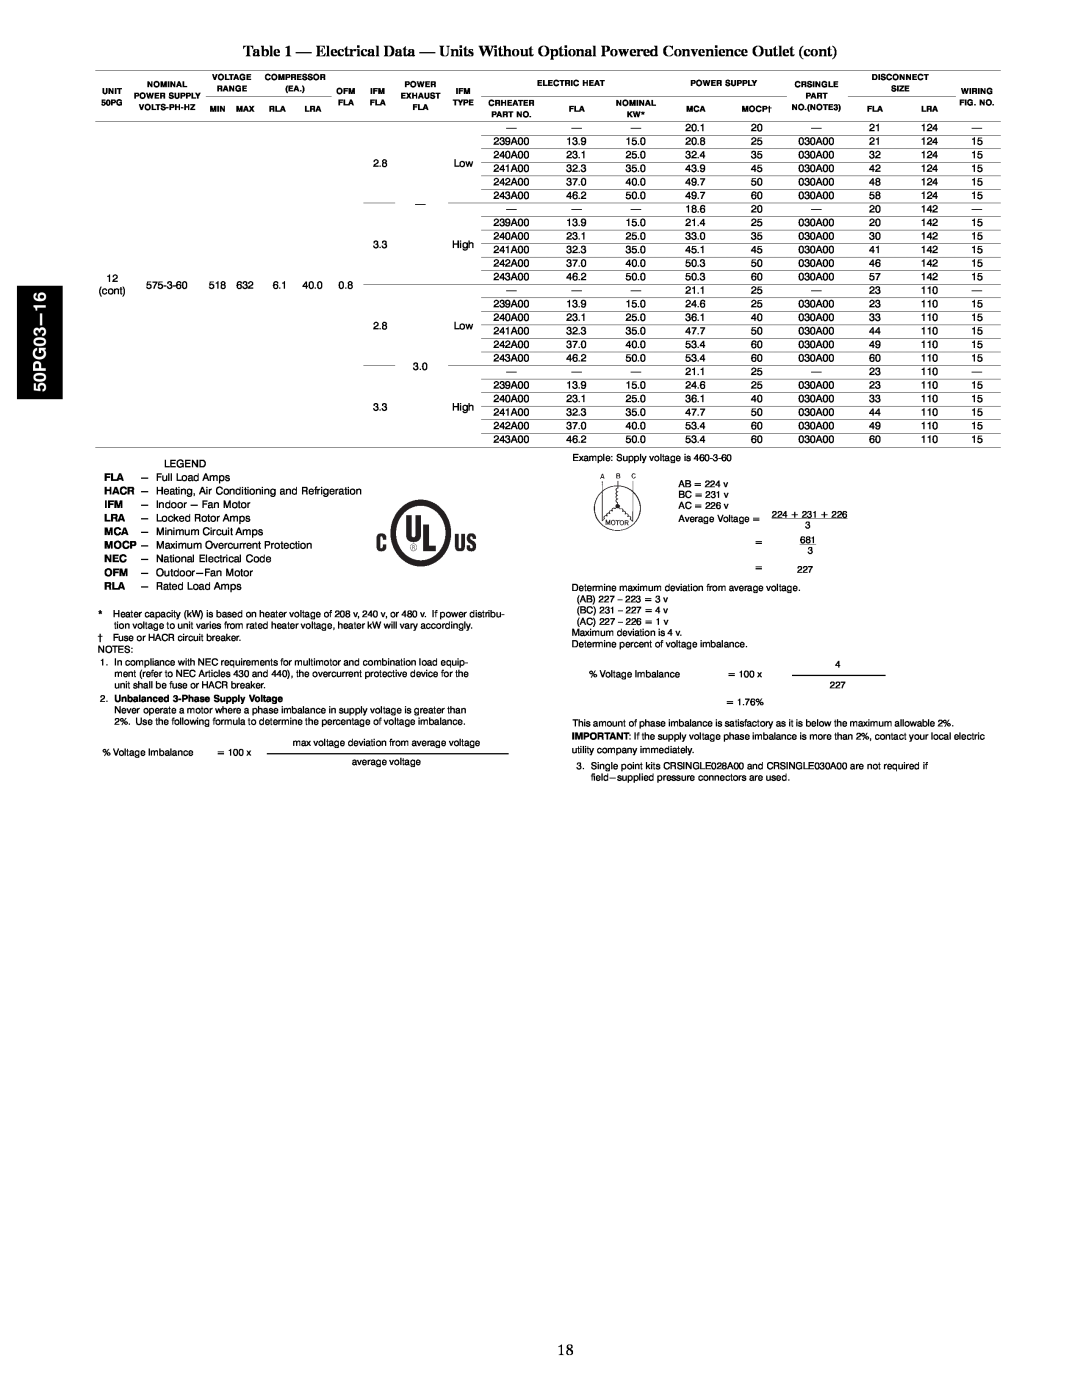 Carrier 50PG03-16 installation instructions 50PG03−16, 239A00 240A00 